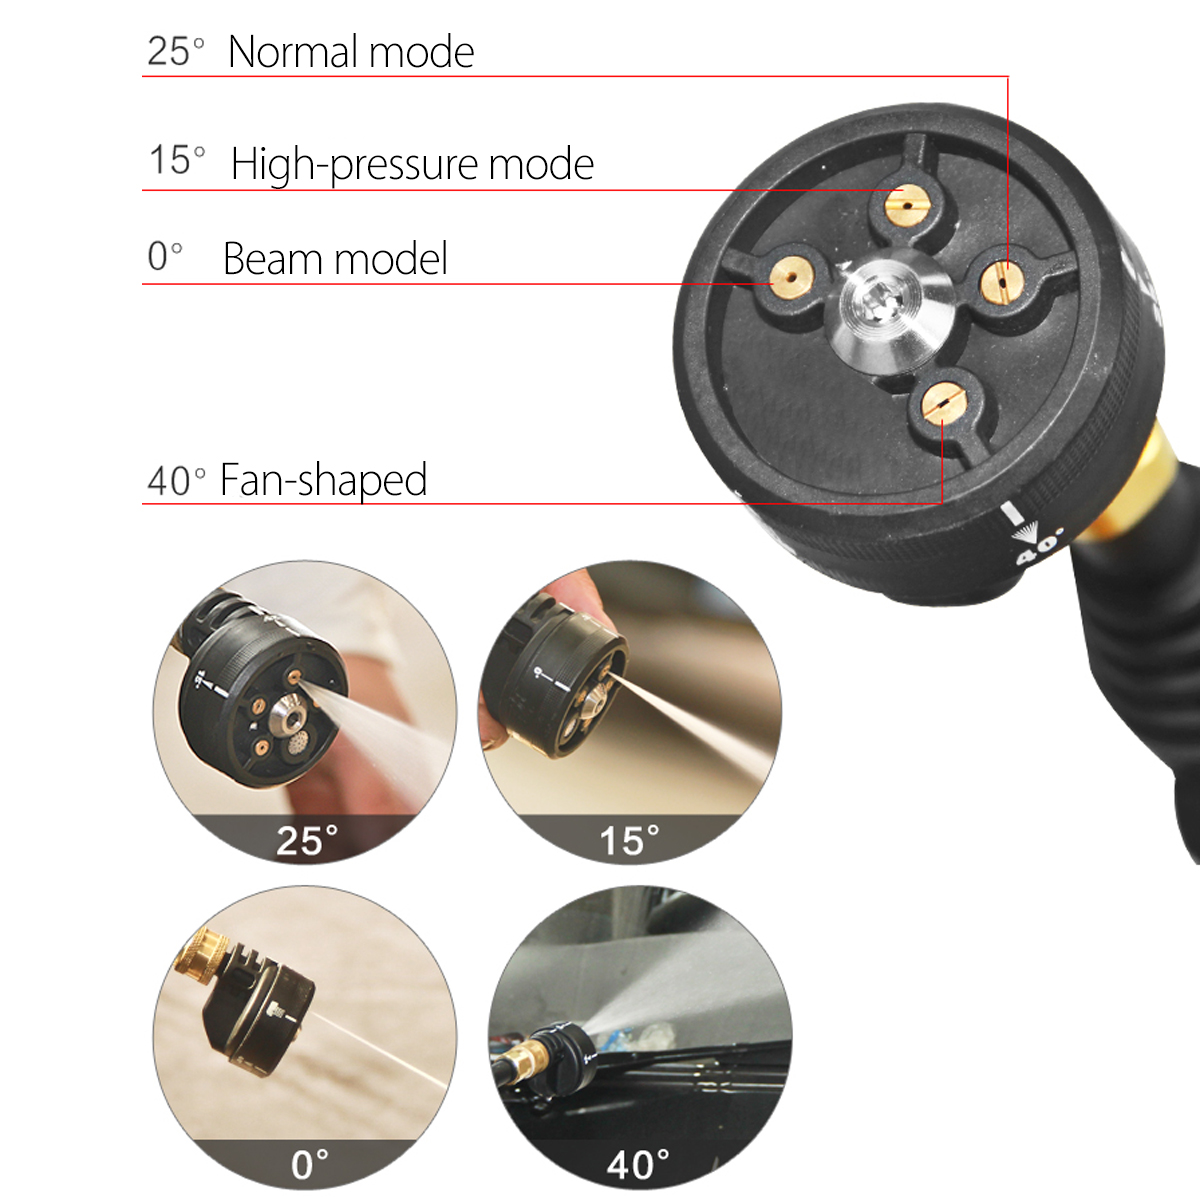 21V-Multifunctional-Cordless-Pressure-Cleaner-Washer-Sprayer-Water-Hose-Nozzle-Pump-with-Battery-1292573-4